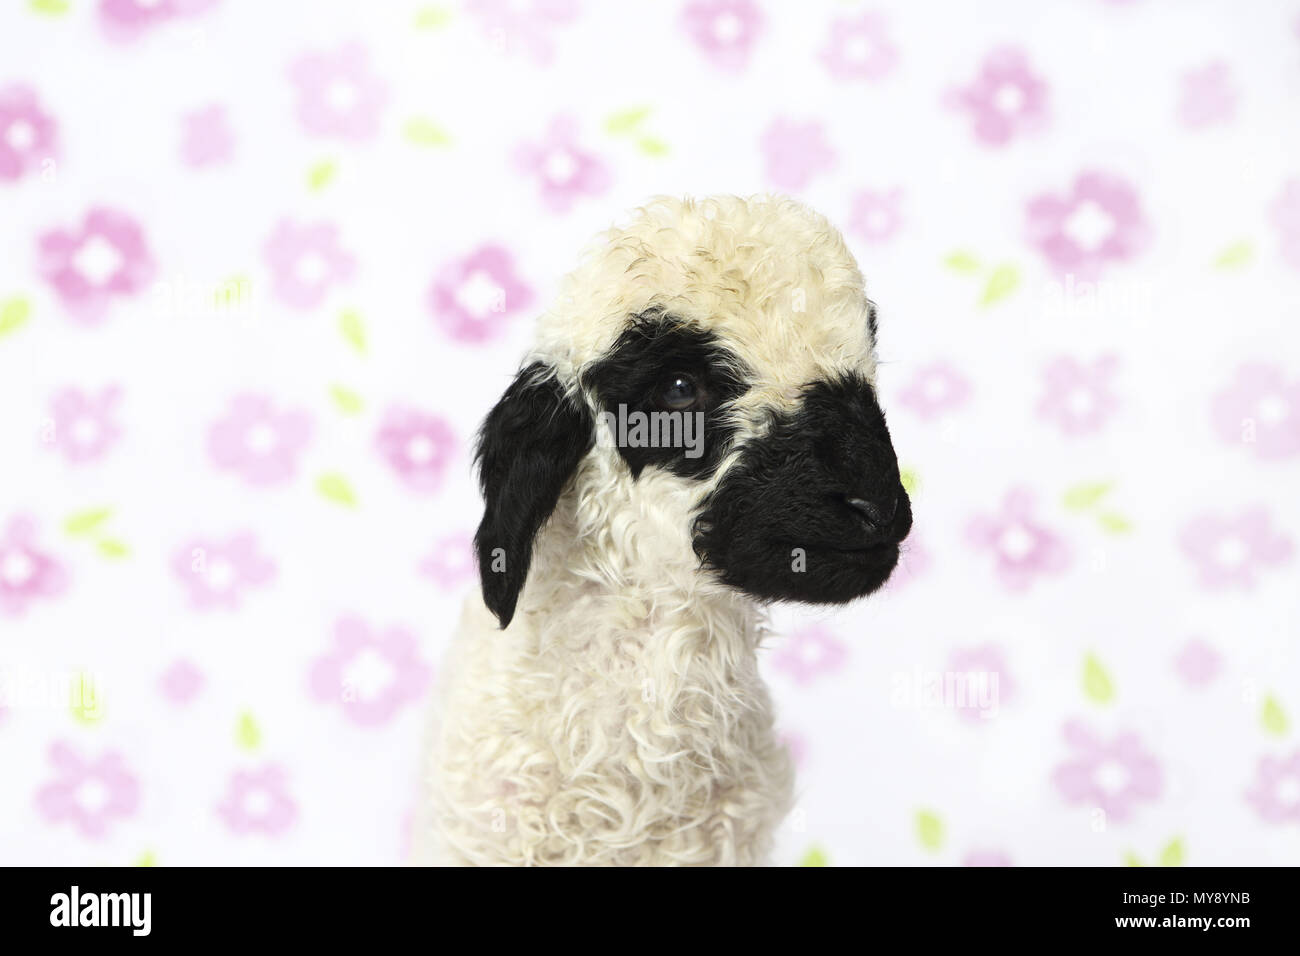 Valais Blacknose Sheep. Portrait of a lamb (6 days old). Studio picture against a white background with flowers. Germany Stock Photo